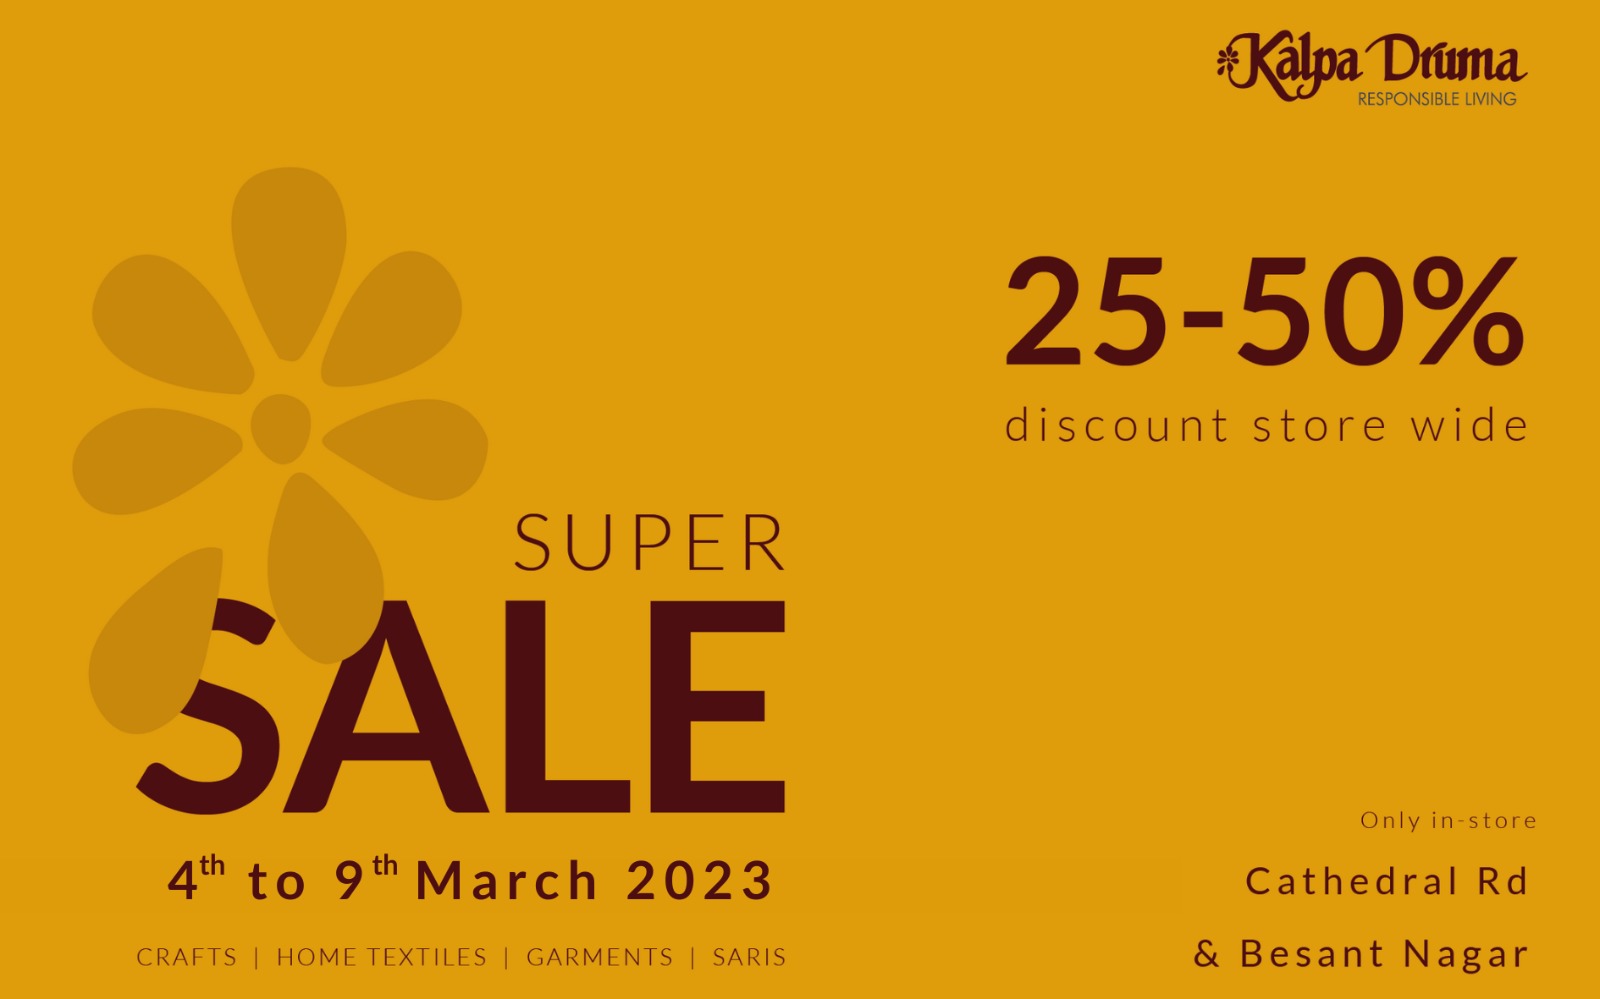 Kalpa Druma RESPONSIBLE LIVING  25-50% discount store wide  SUPER SALE  4th to 9th March 2023 CRAFTS HOME TEXTILES | GARMENTS | SARIS  Only in-store  Cathedral Rd & Besant Nagar